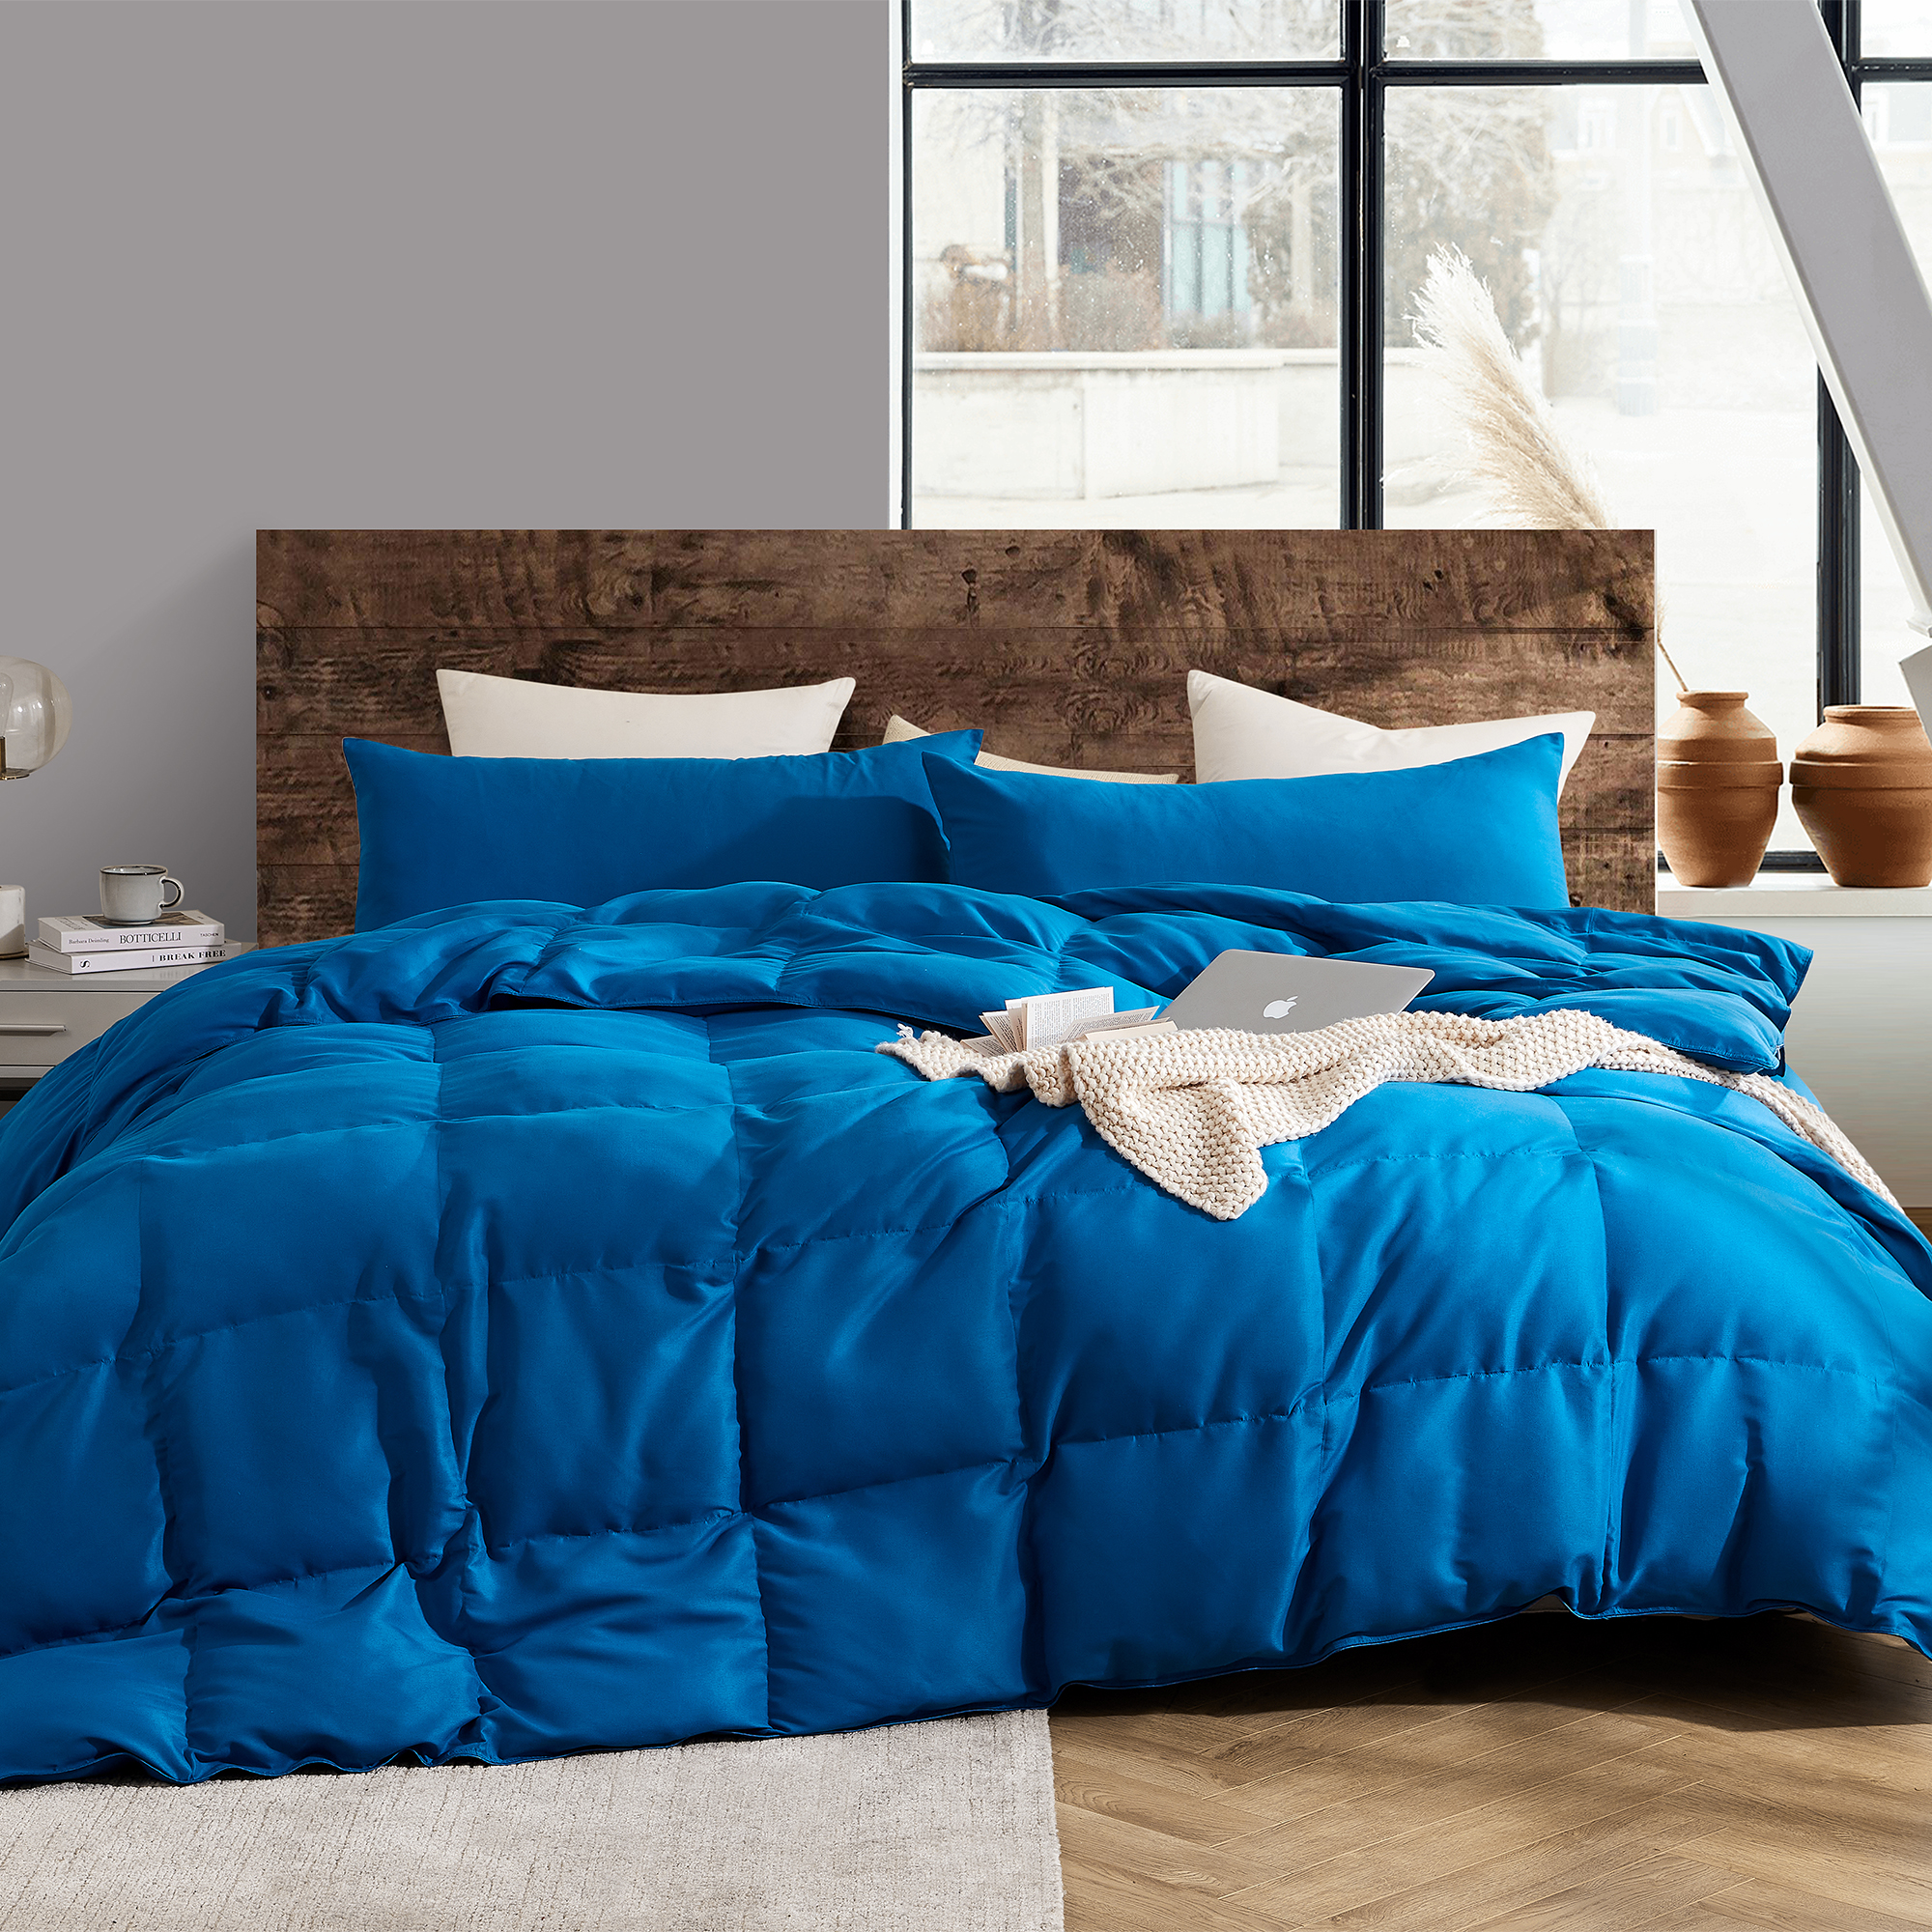 Largest Comforter Set Sized Twin XL, Queen, King, Alaskan King and Alaskan King Oversized Comforter